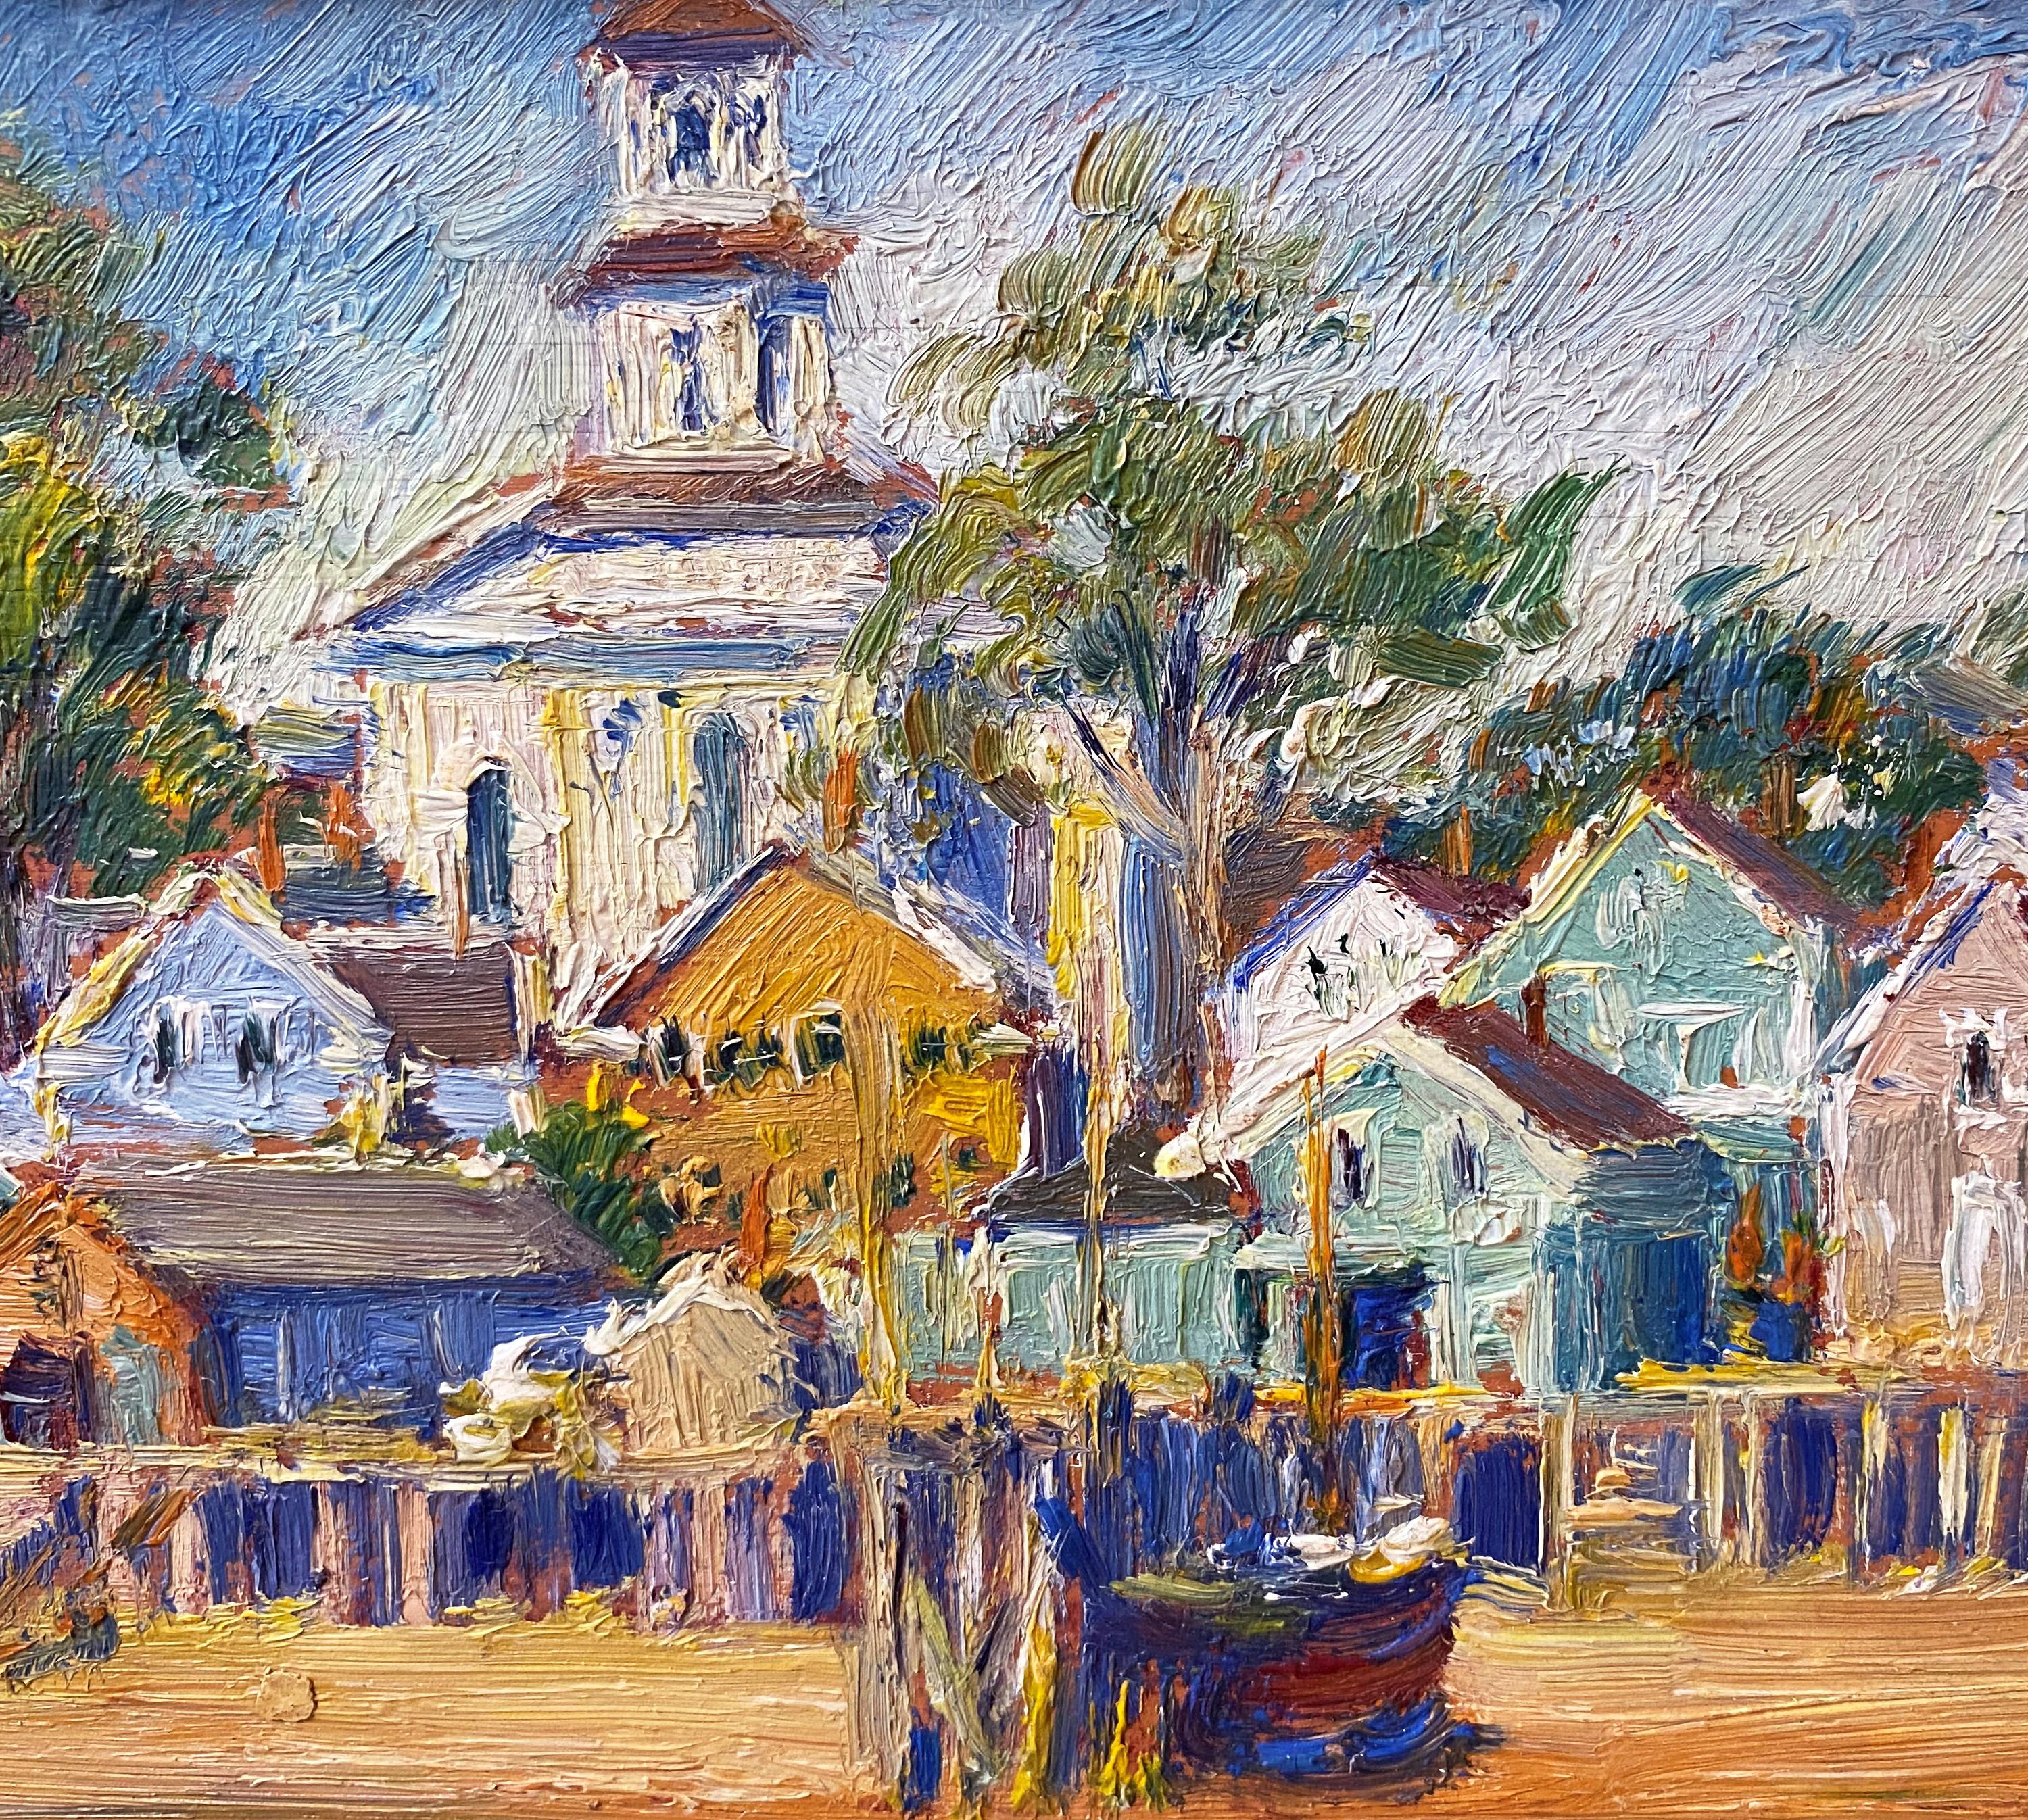 Provincetown - American Impressionist Painting by Max Kuehne